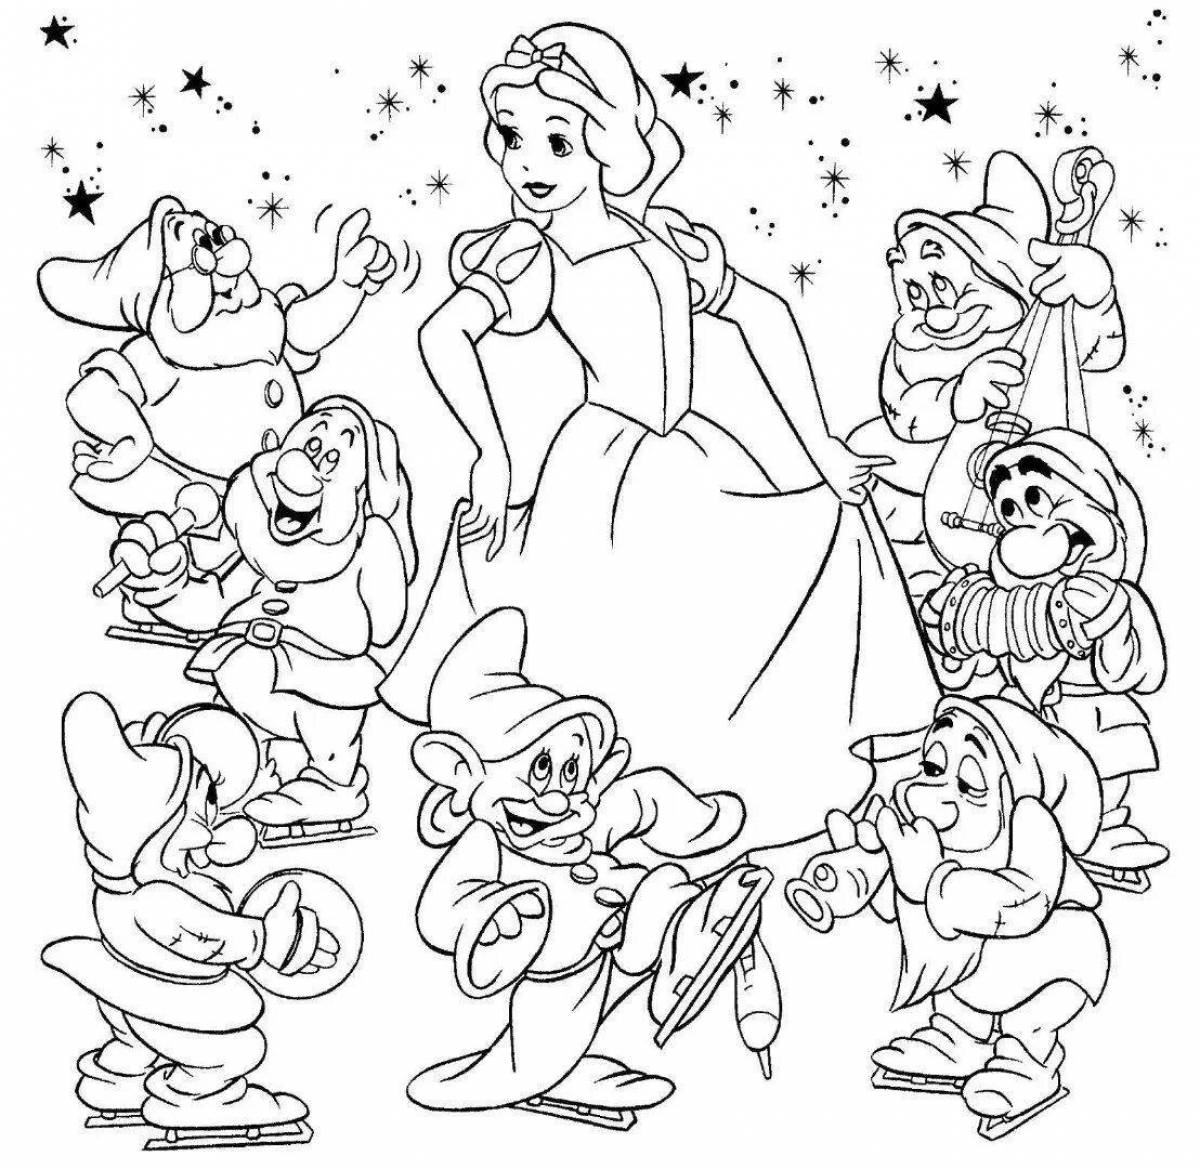 Disney dazzling coloring book for kids 6-7 years old